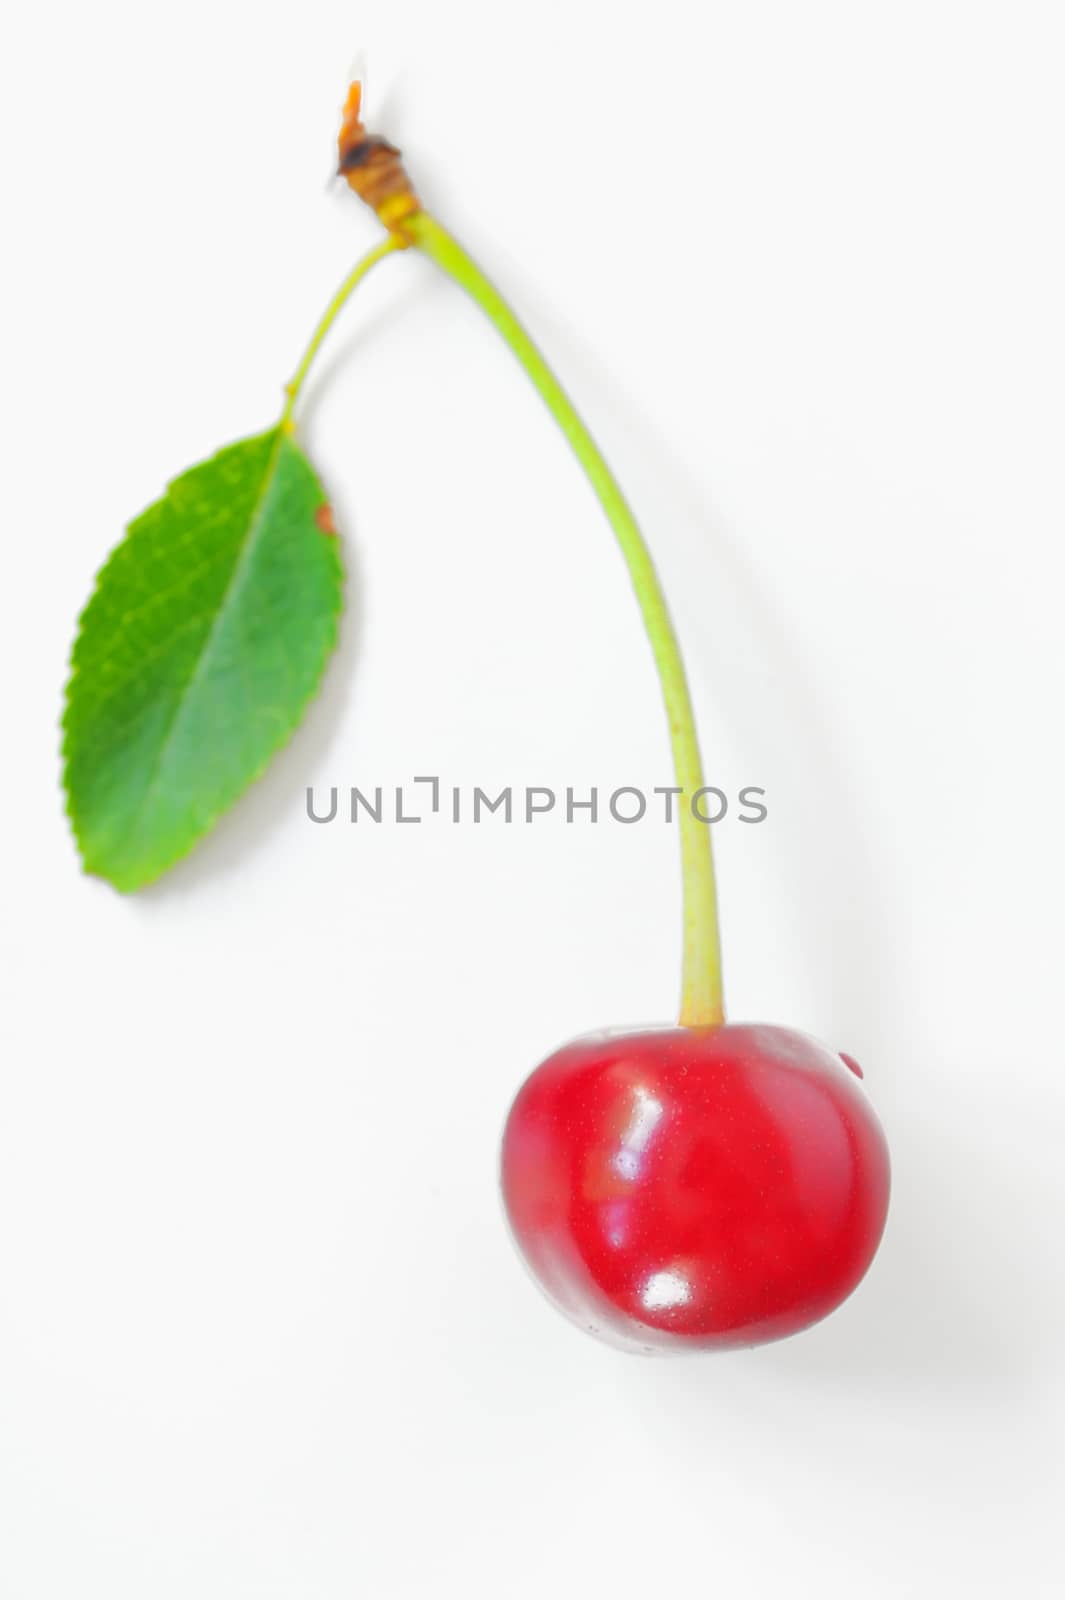 ripen cherries on a white background by mady70